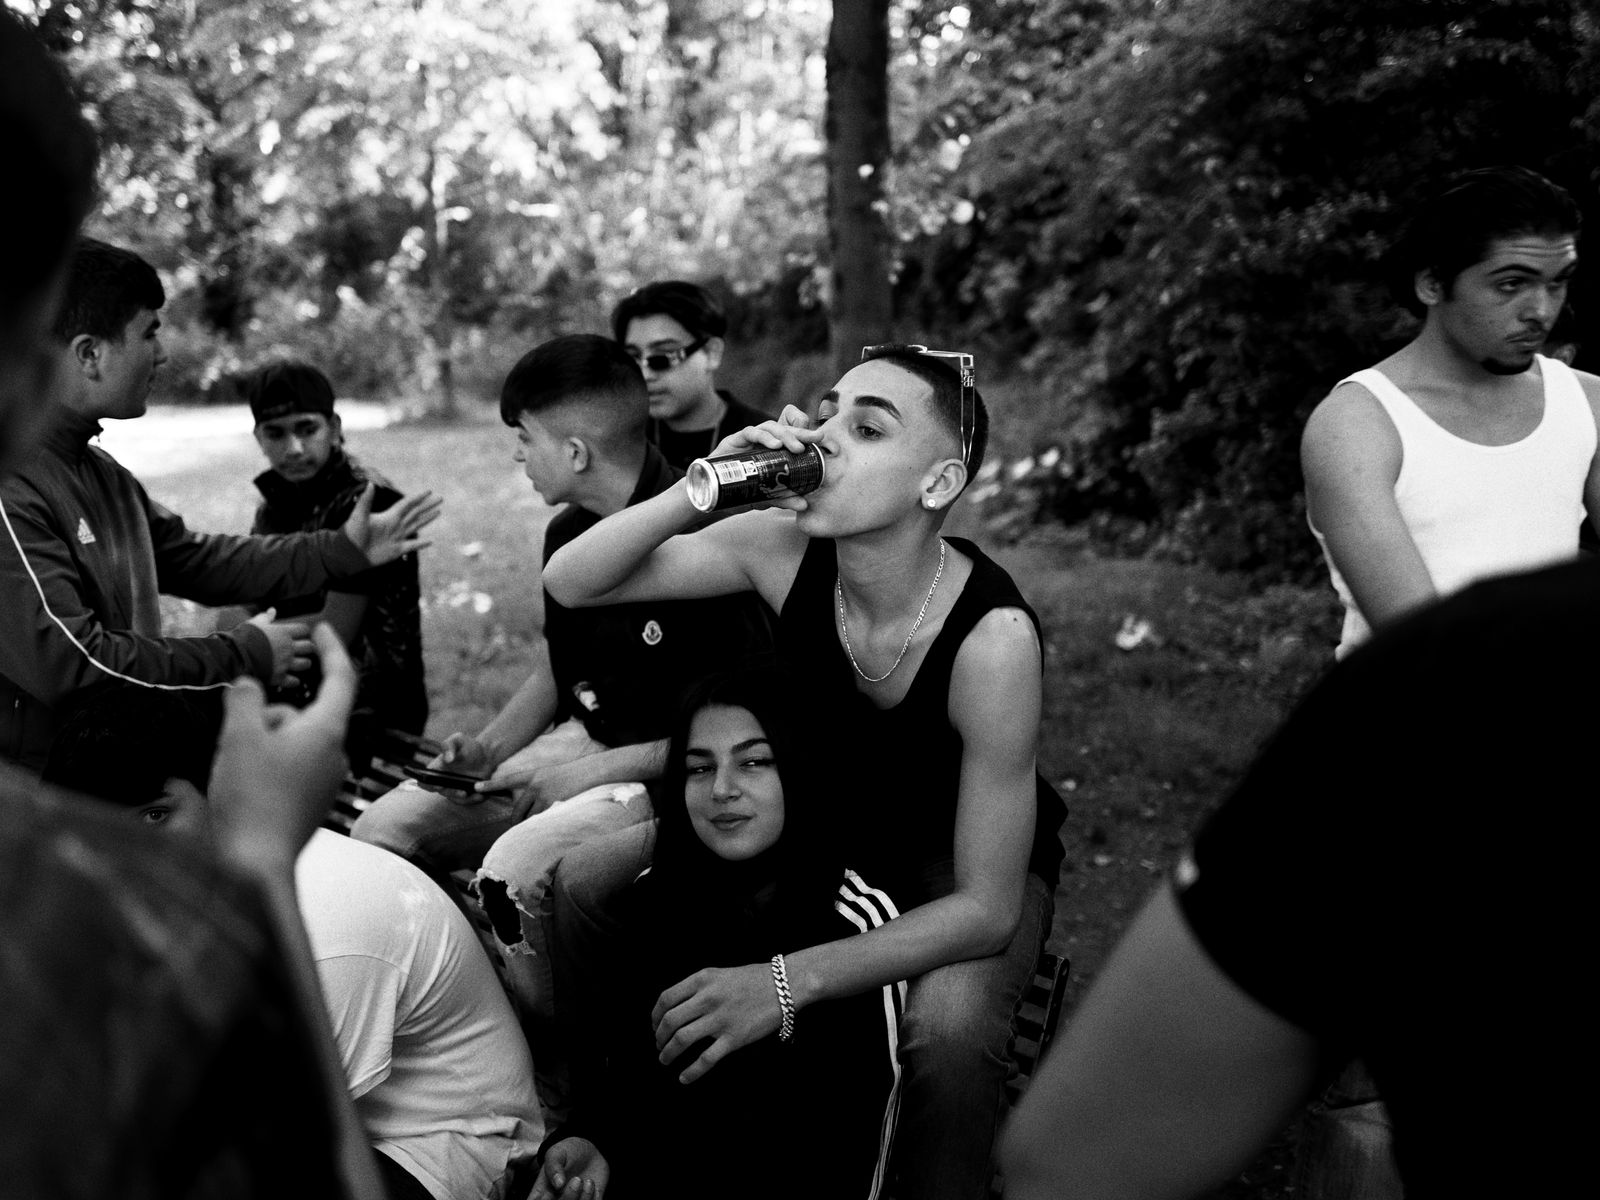 © Toby Binder - Stiv and his girlfriend meeting up with friends in the park.